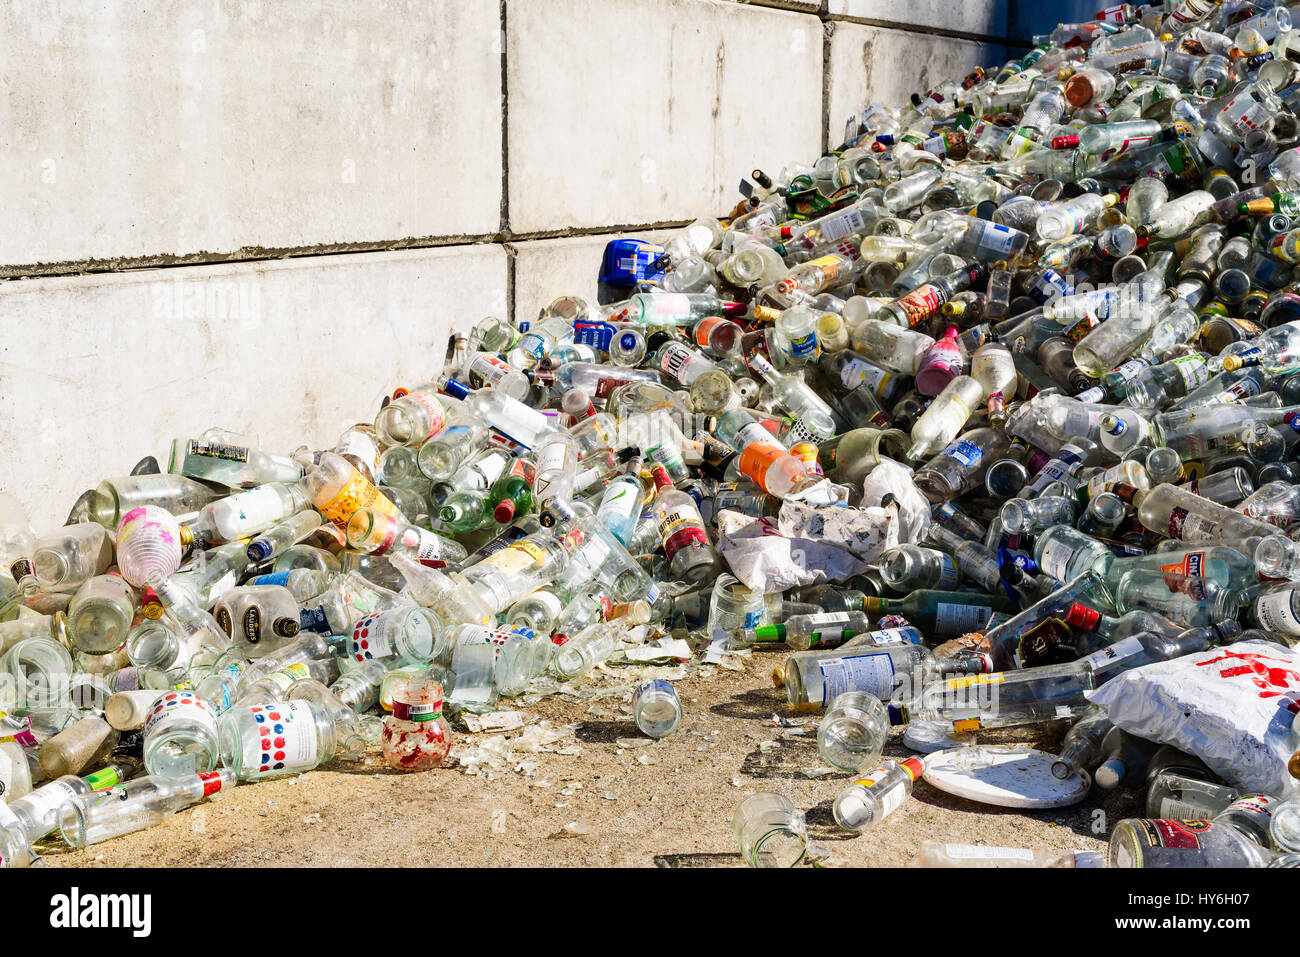 Ronneby, Sweden - March 27, 2017: Documentary of public waste station. Large pile of clear glass destined for recycling. Stock Photo